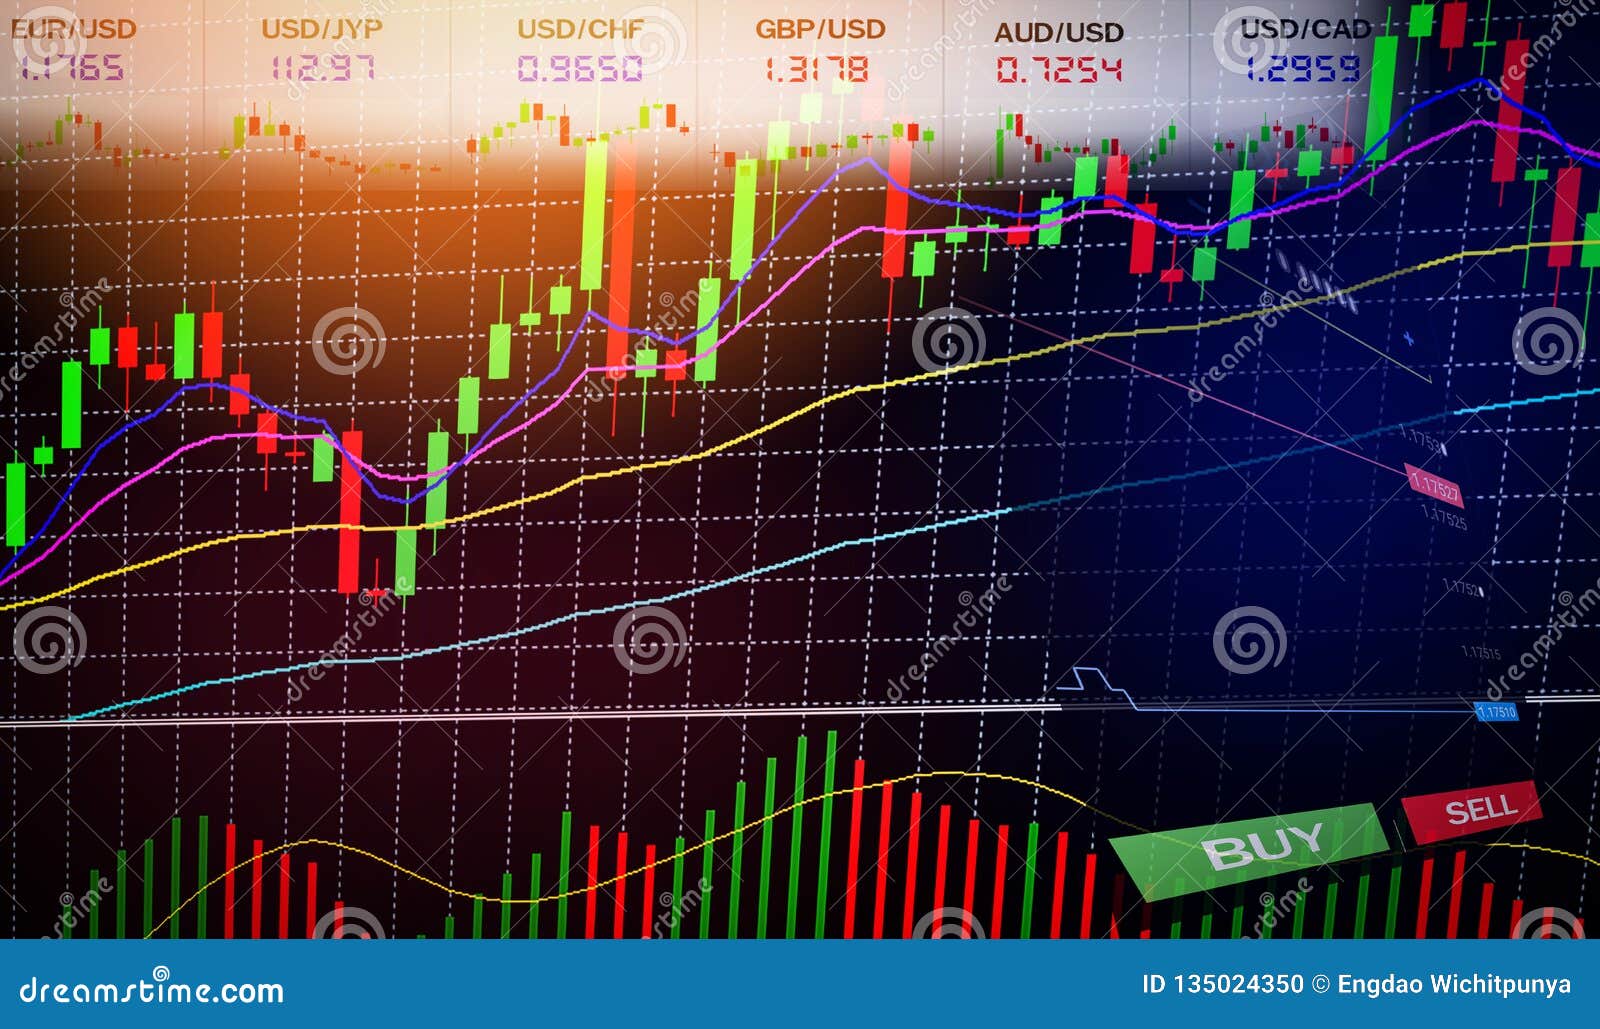 Forex charts on the website forexpros copper chart live